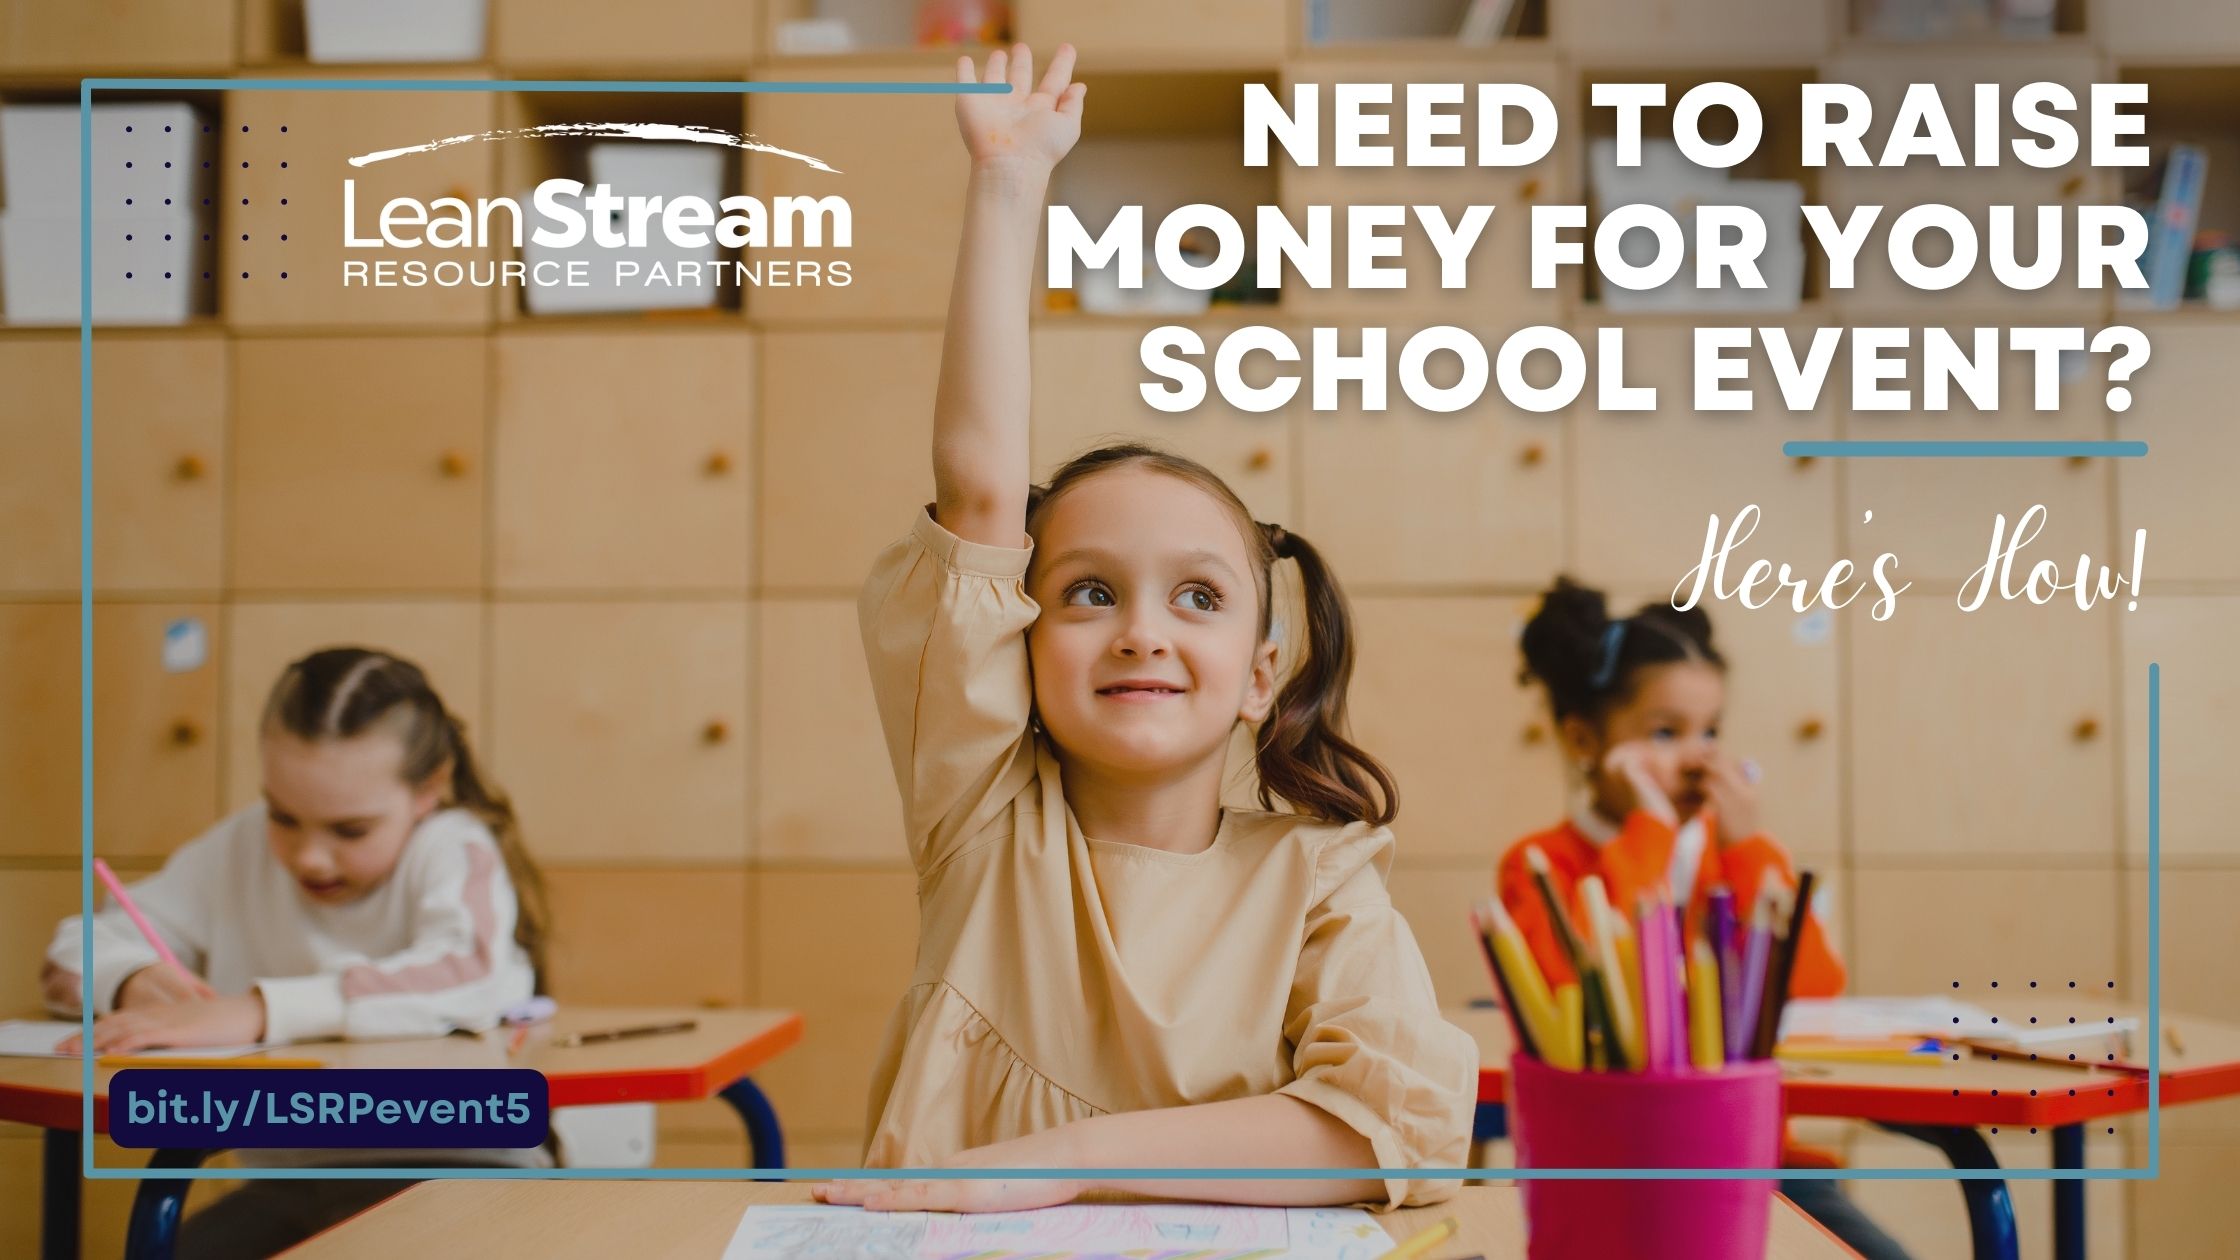 How to raise money for a school event